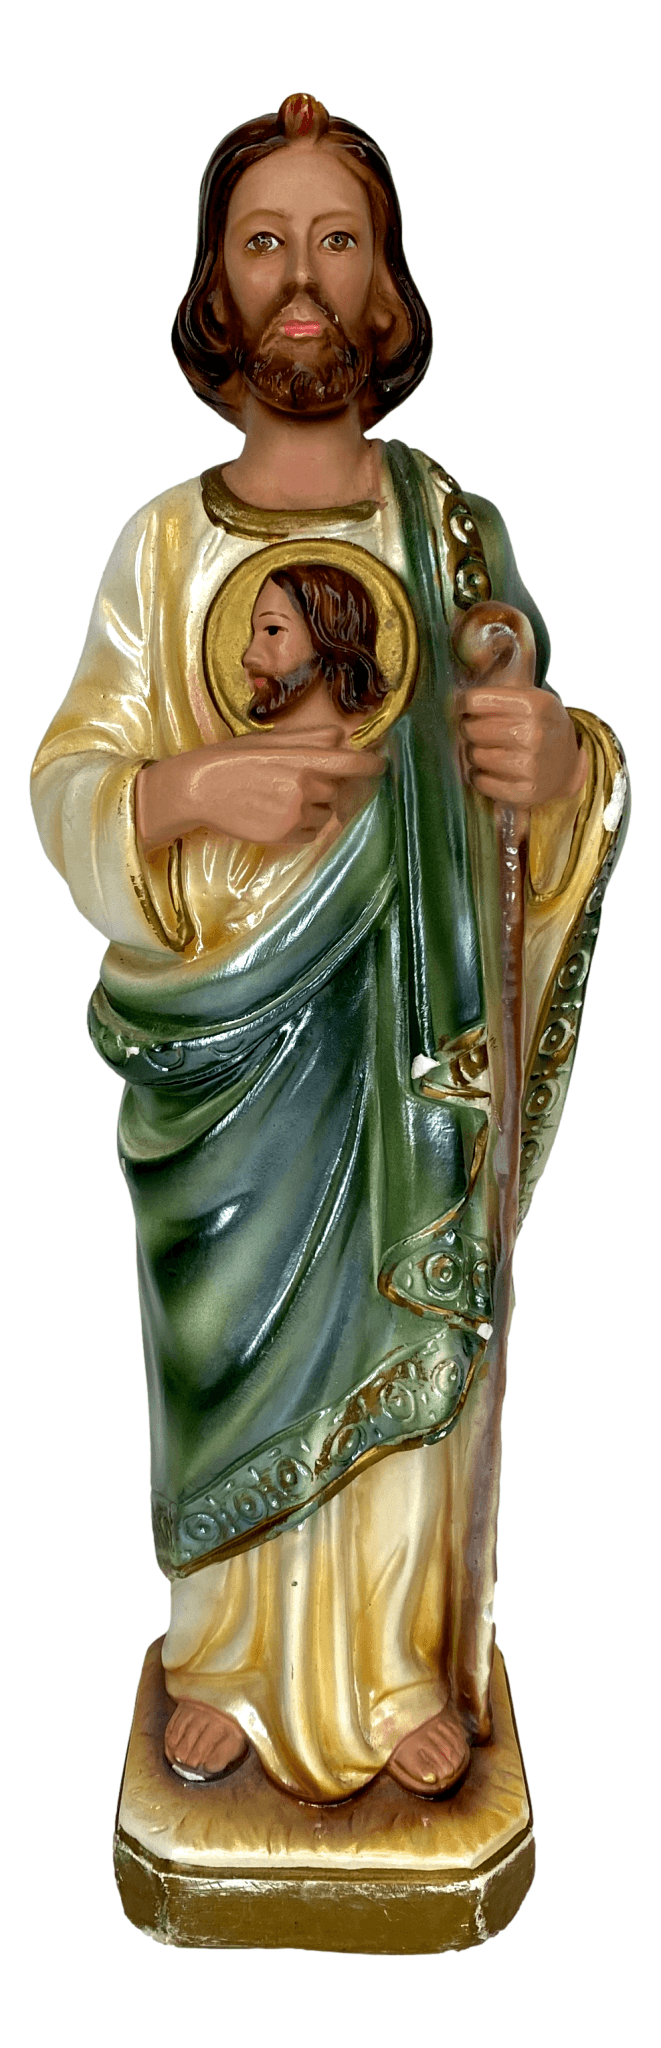 Statue Plaster of Paris Saint Jude Columbia Statuary 1978 Made in Italy 4 L x 3 W x 12 H Inches - Ysleta Mission Gift Shop- VOTED El Paso's Best Gift Shop